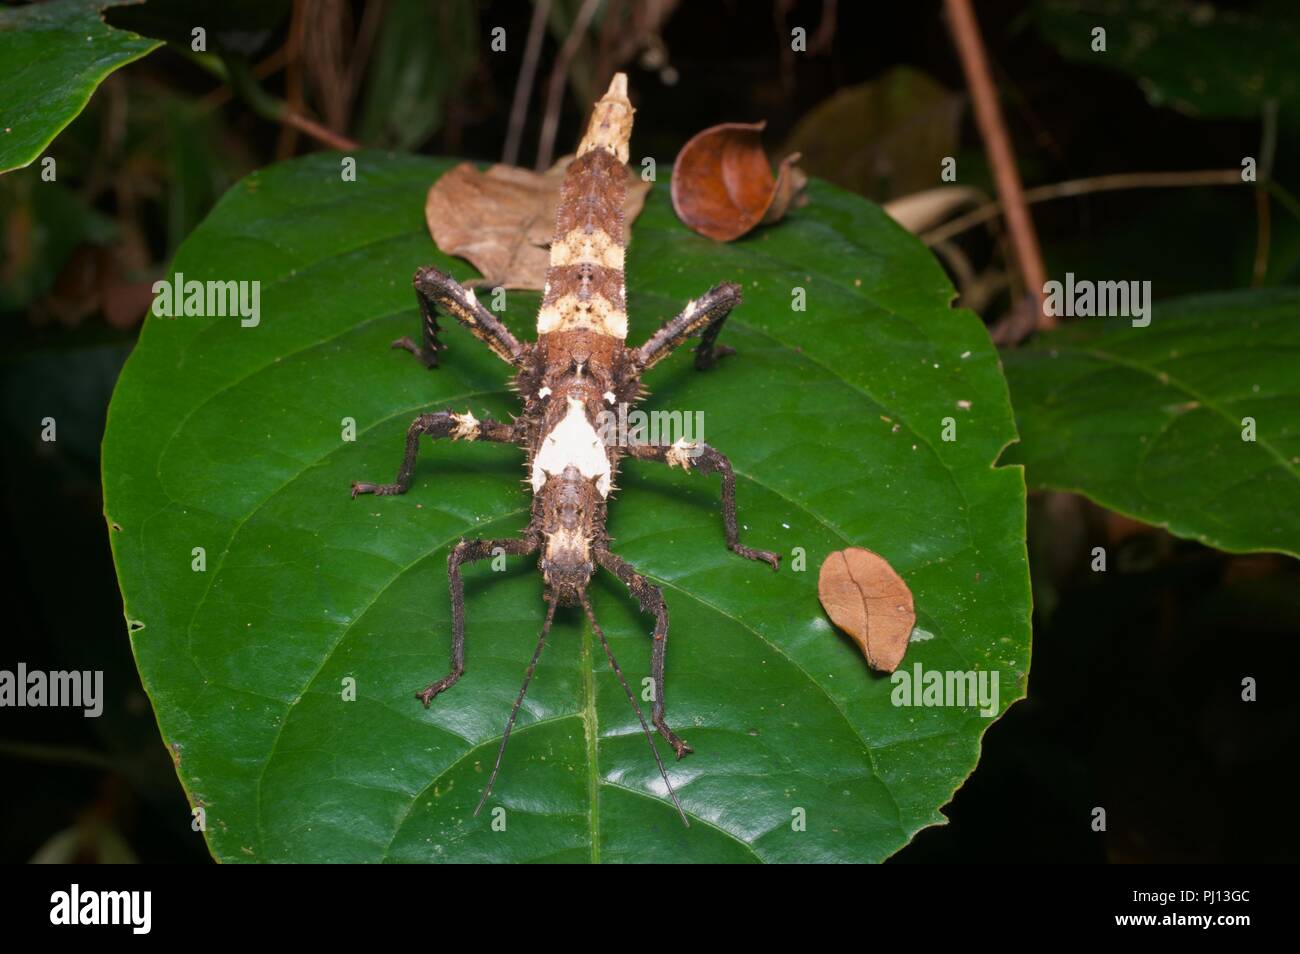 A stick insect (phasmid) on a rainforest leaf at night in Kubah National Park, Sarawak, East Malaysia, Borneo. Stock Photo